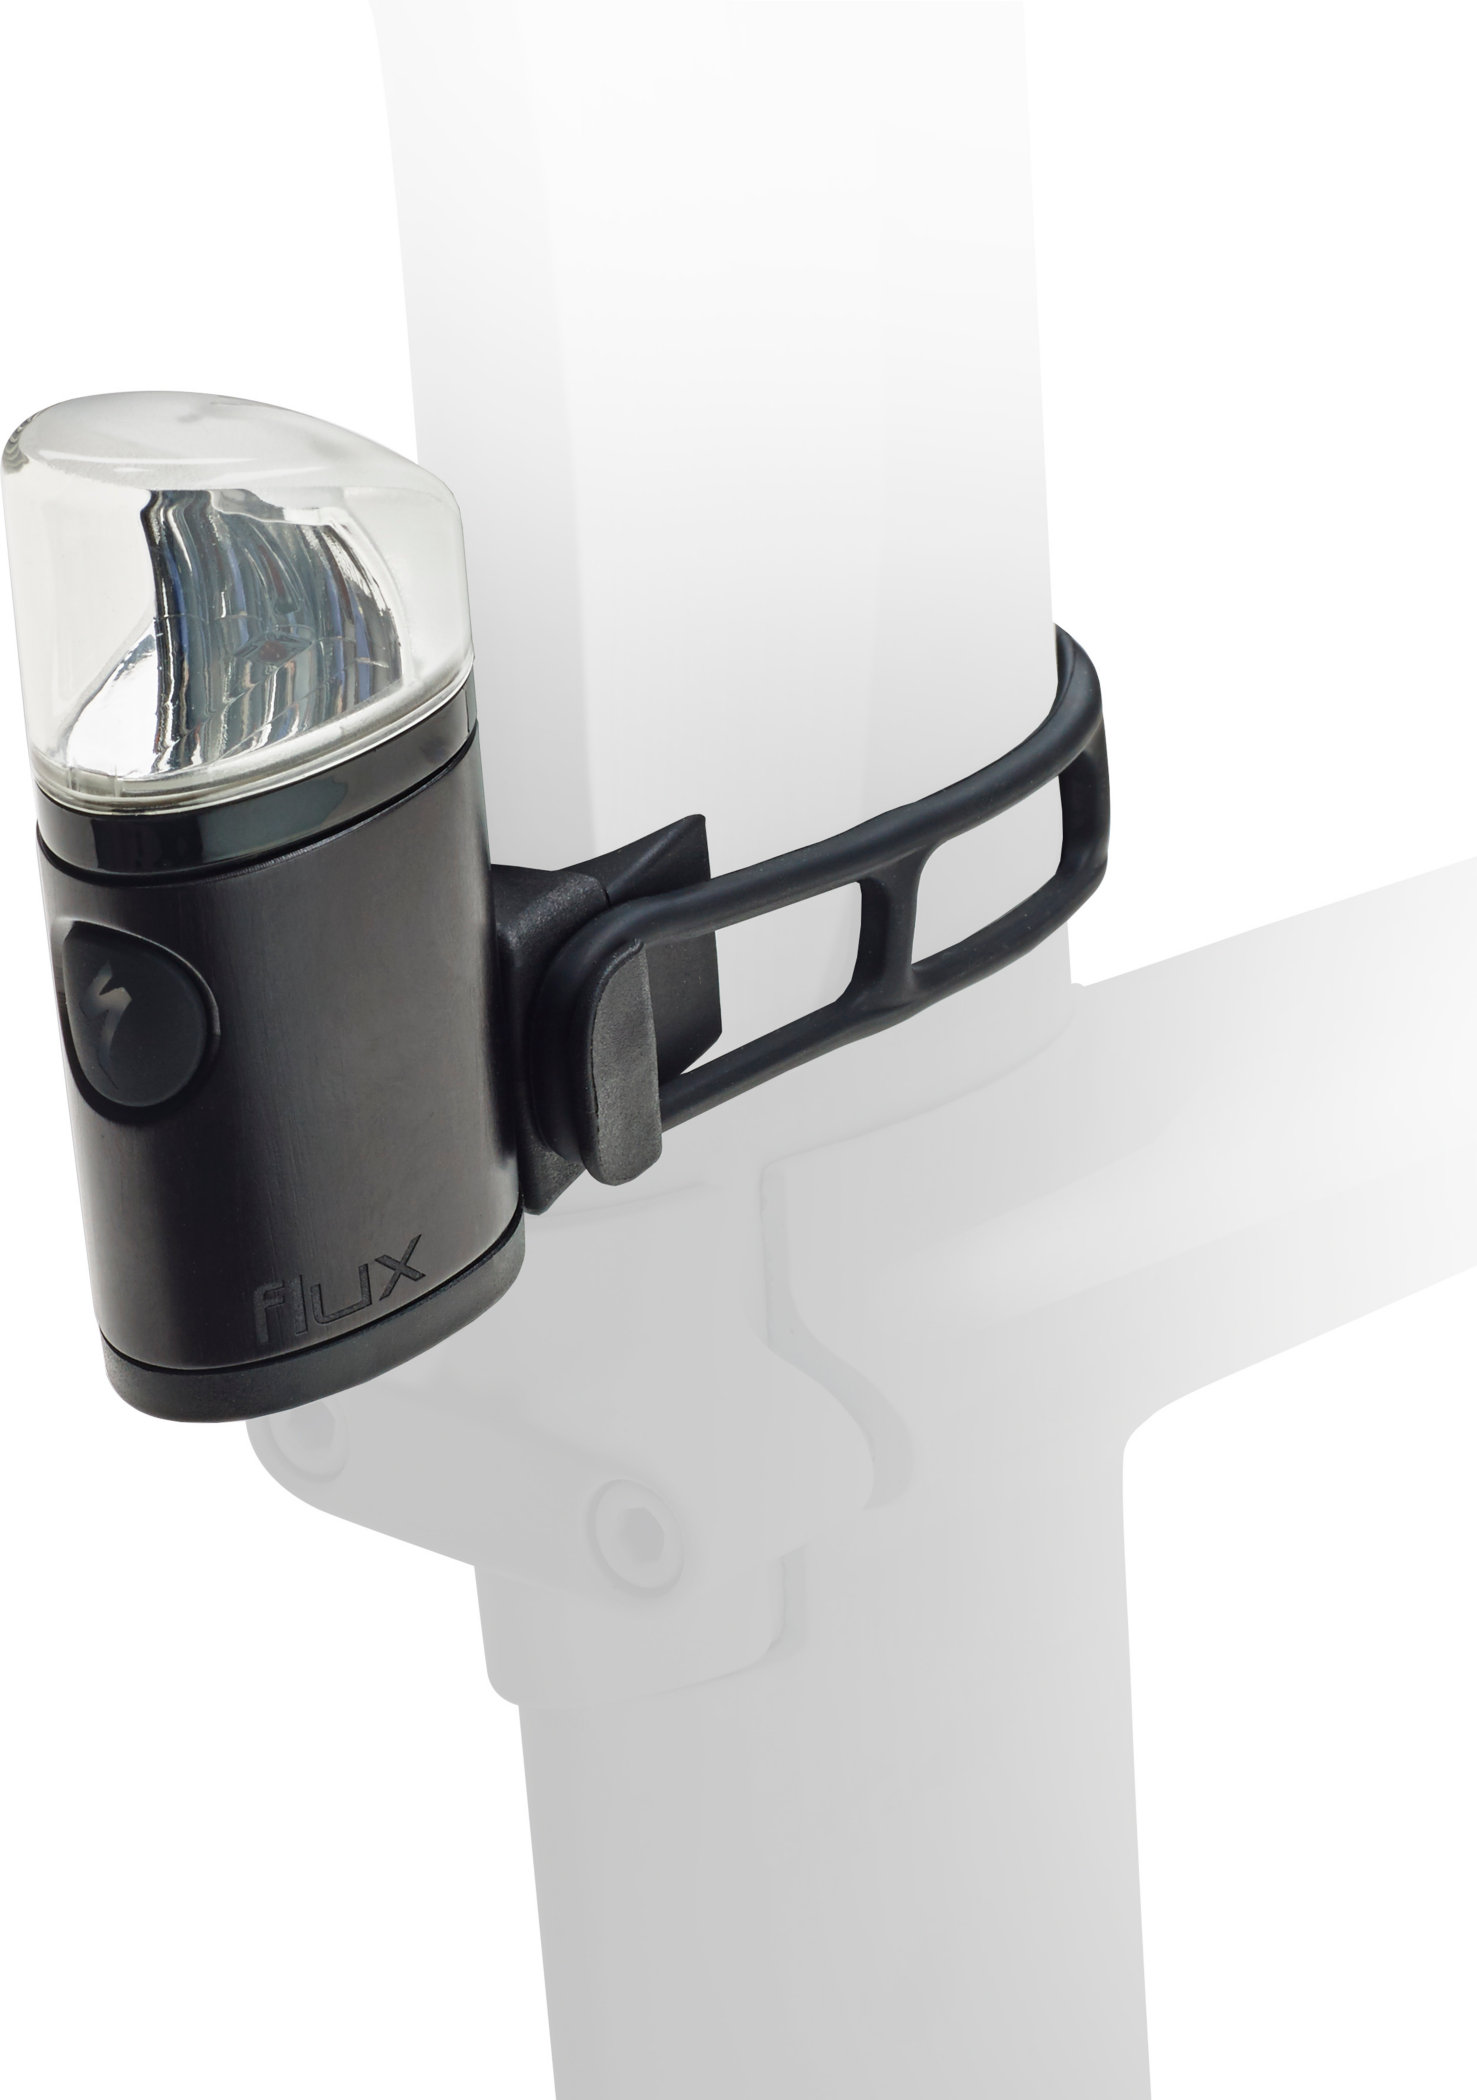 specialized light mount